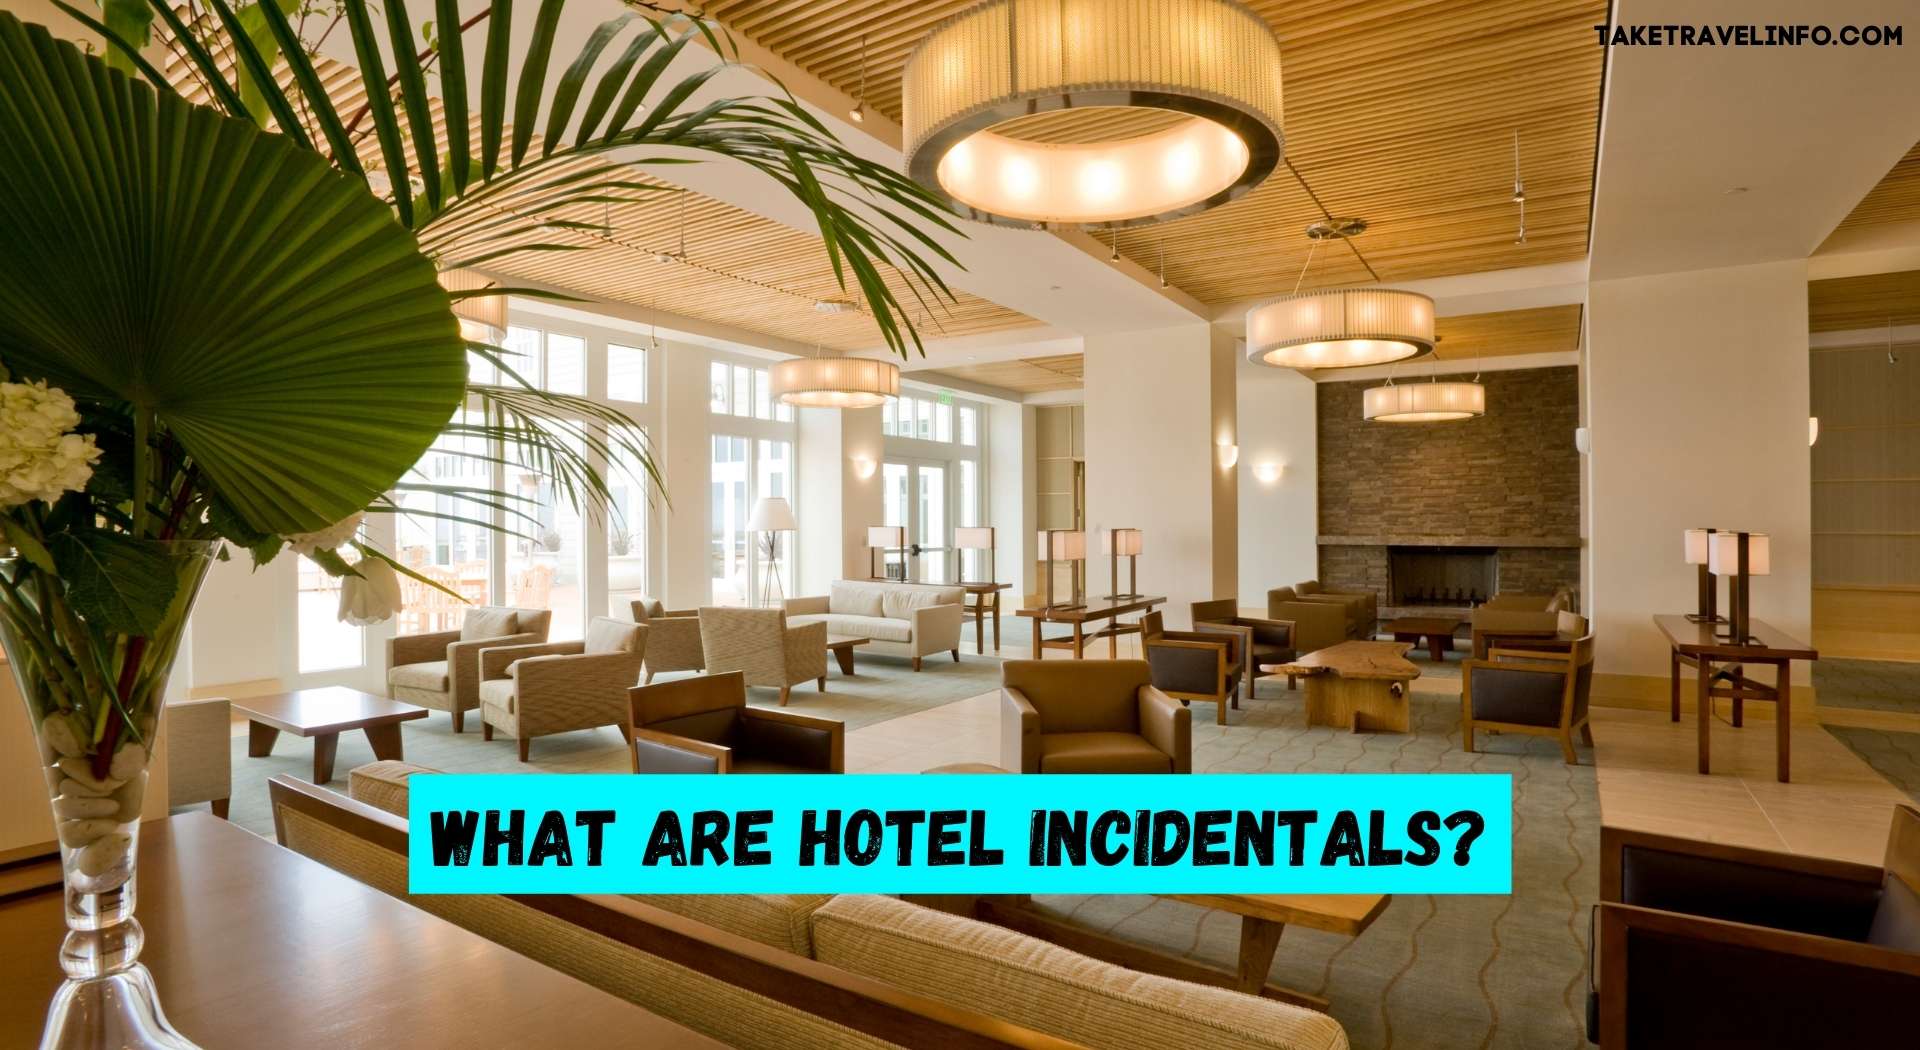 What are Hotel Incidentals?